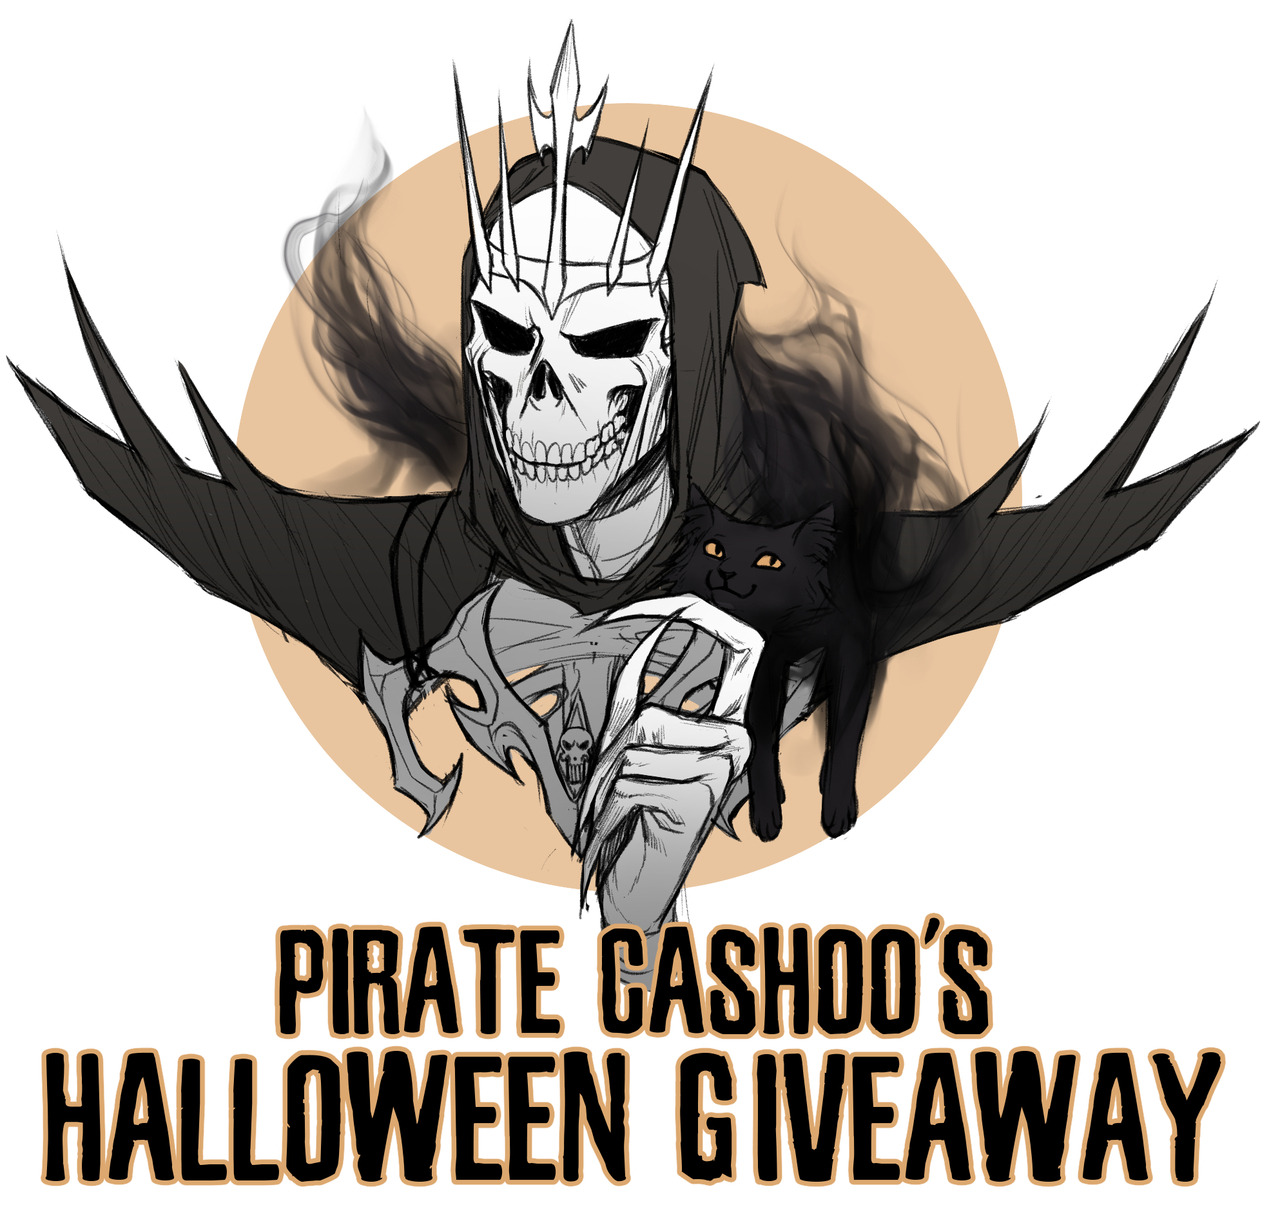 pirate-cashoo: I didn’t get to do an art giveaway on my birthday so I am doing